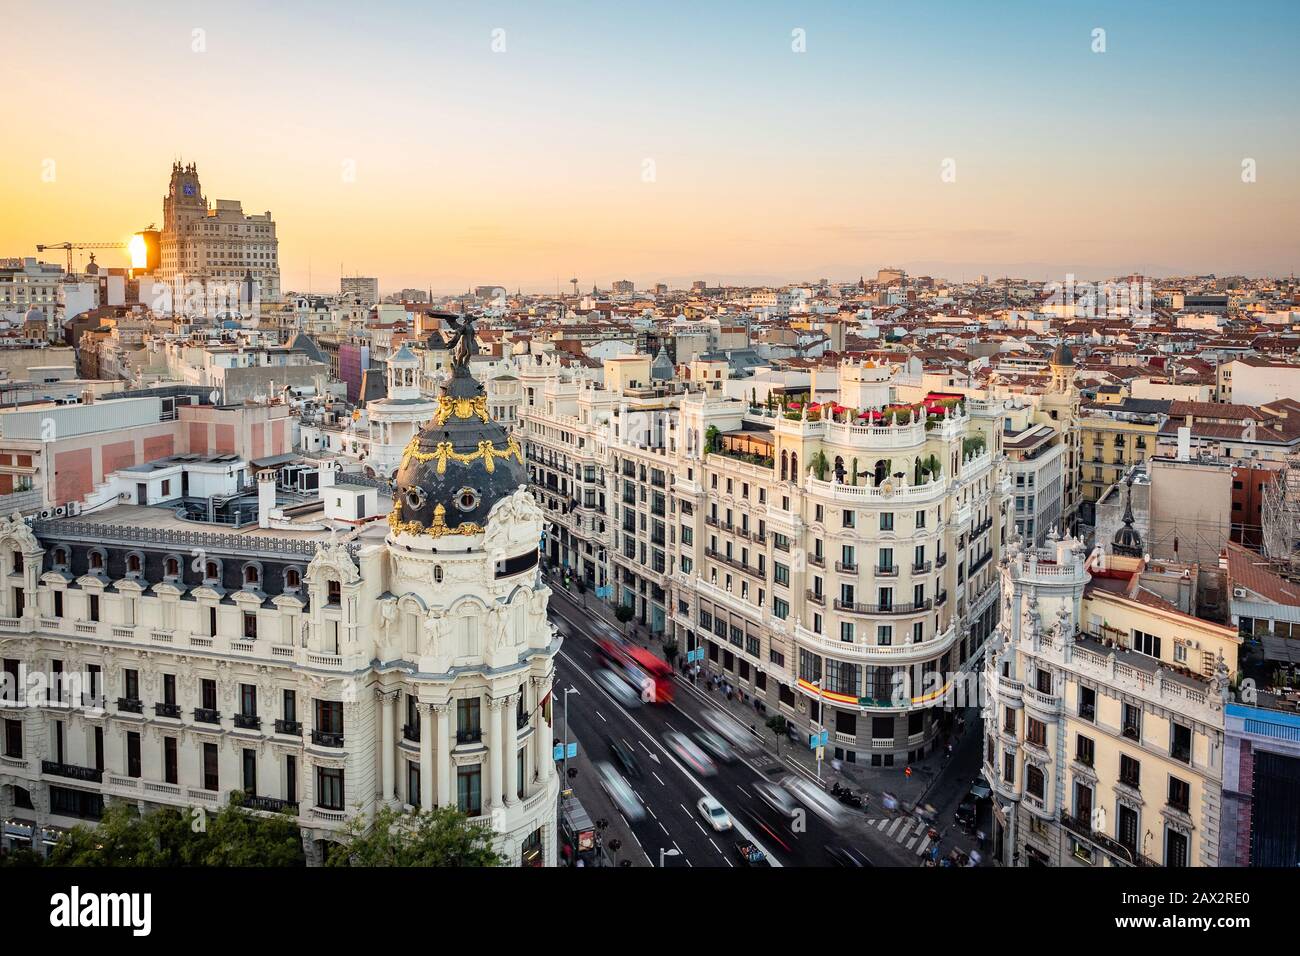 Landmark buildings on Gran Via street at sunset in Central Madrid, the capital and largest city in Spain. Stock Photo